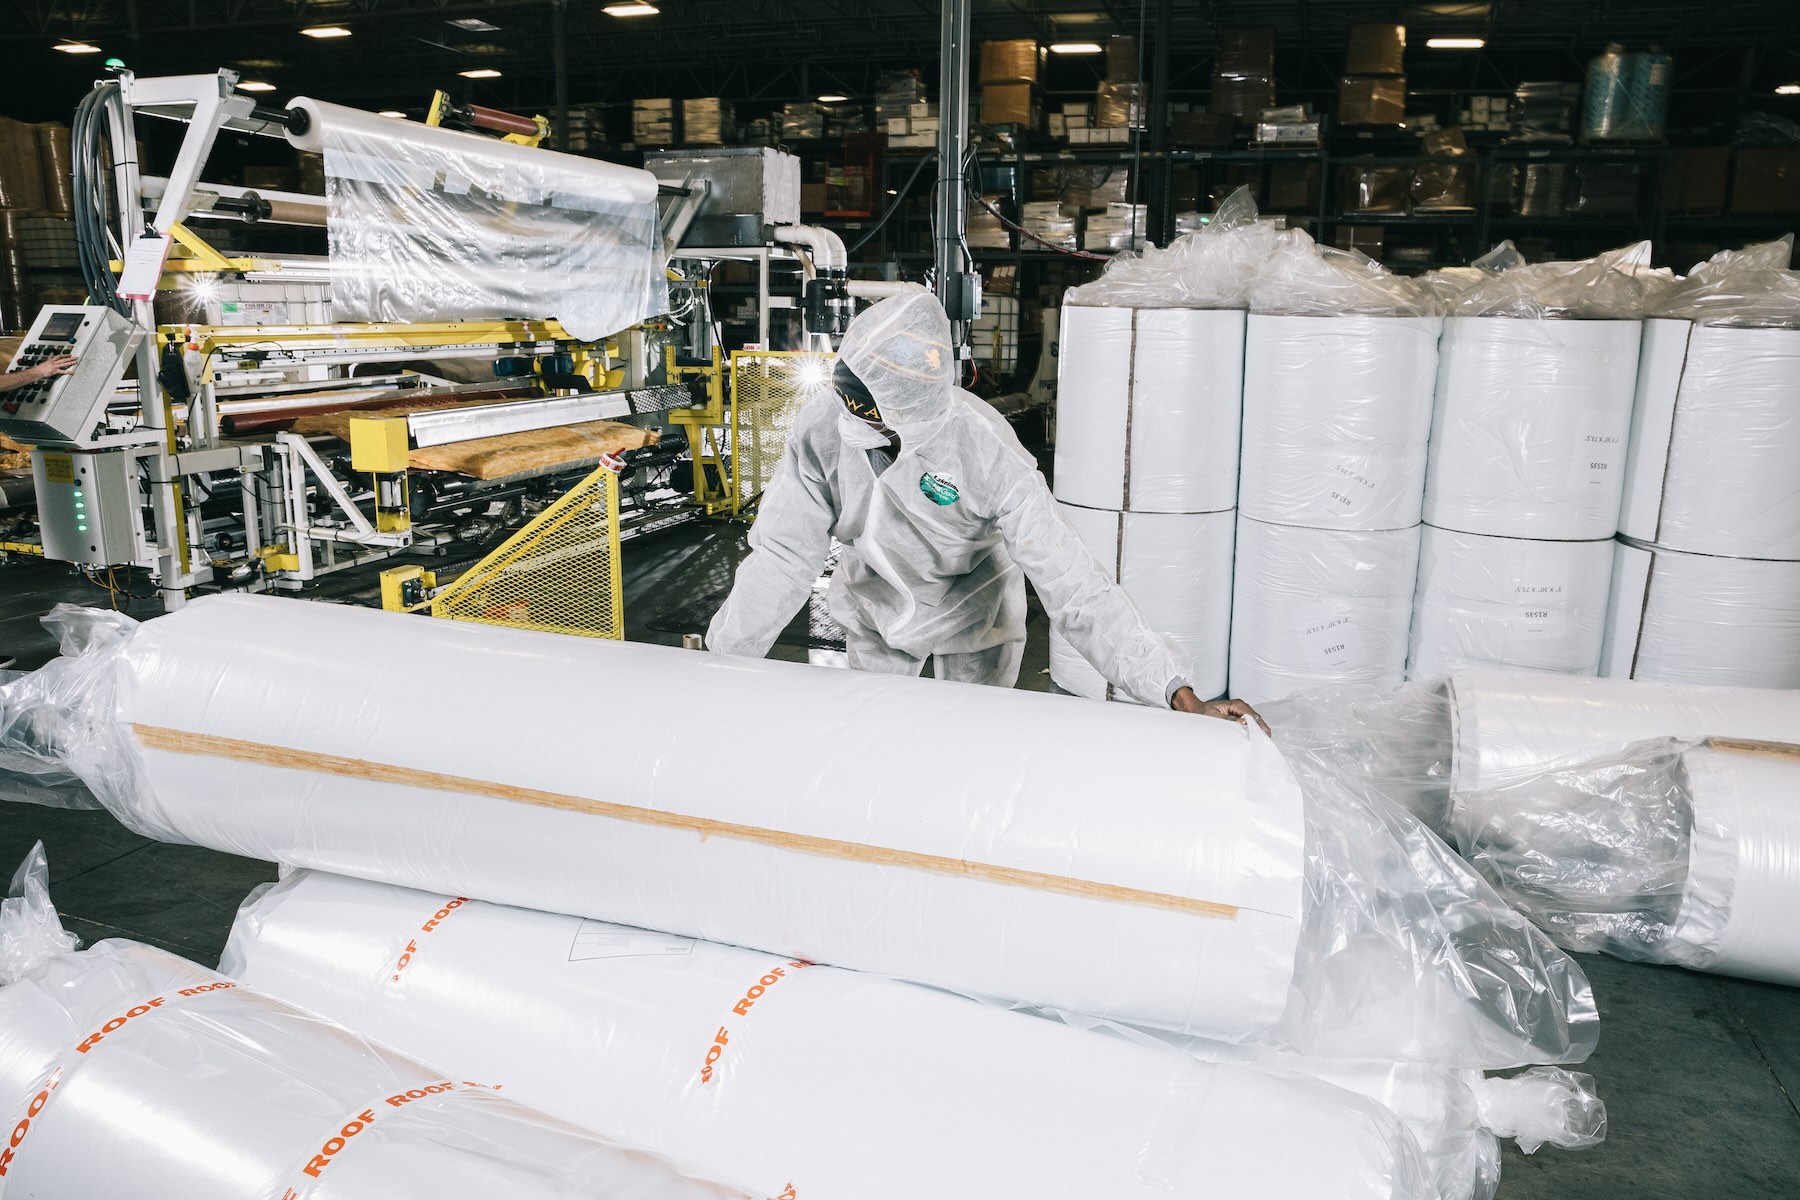 workers fabricating rolls of insulation